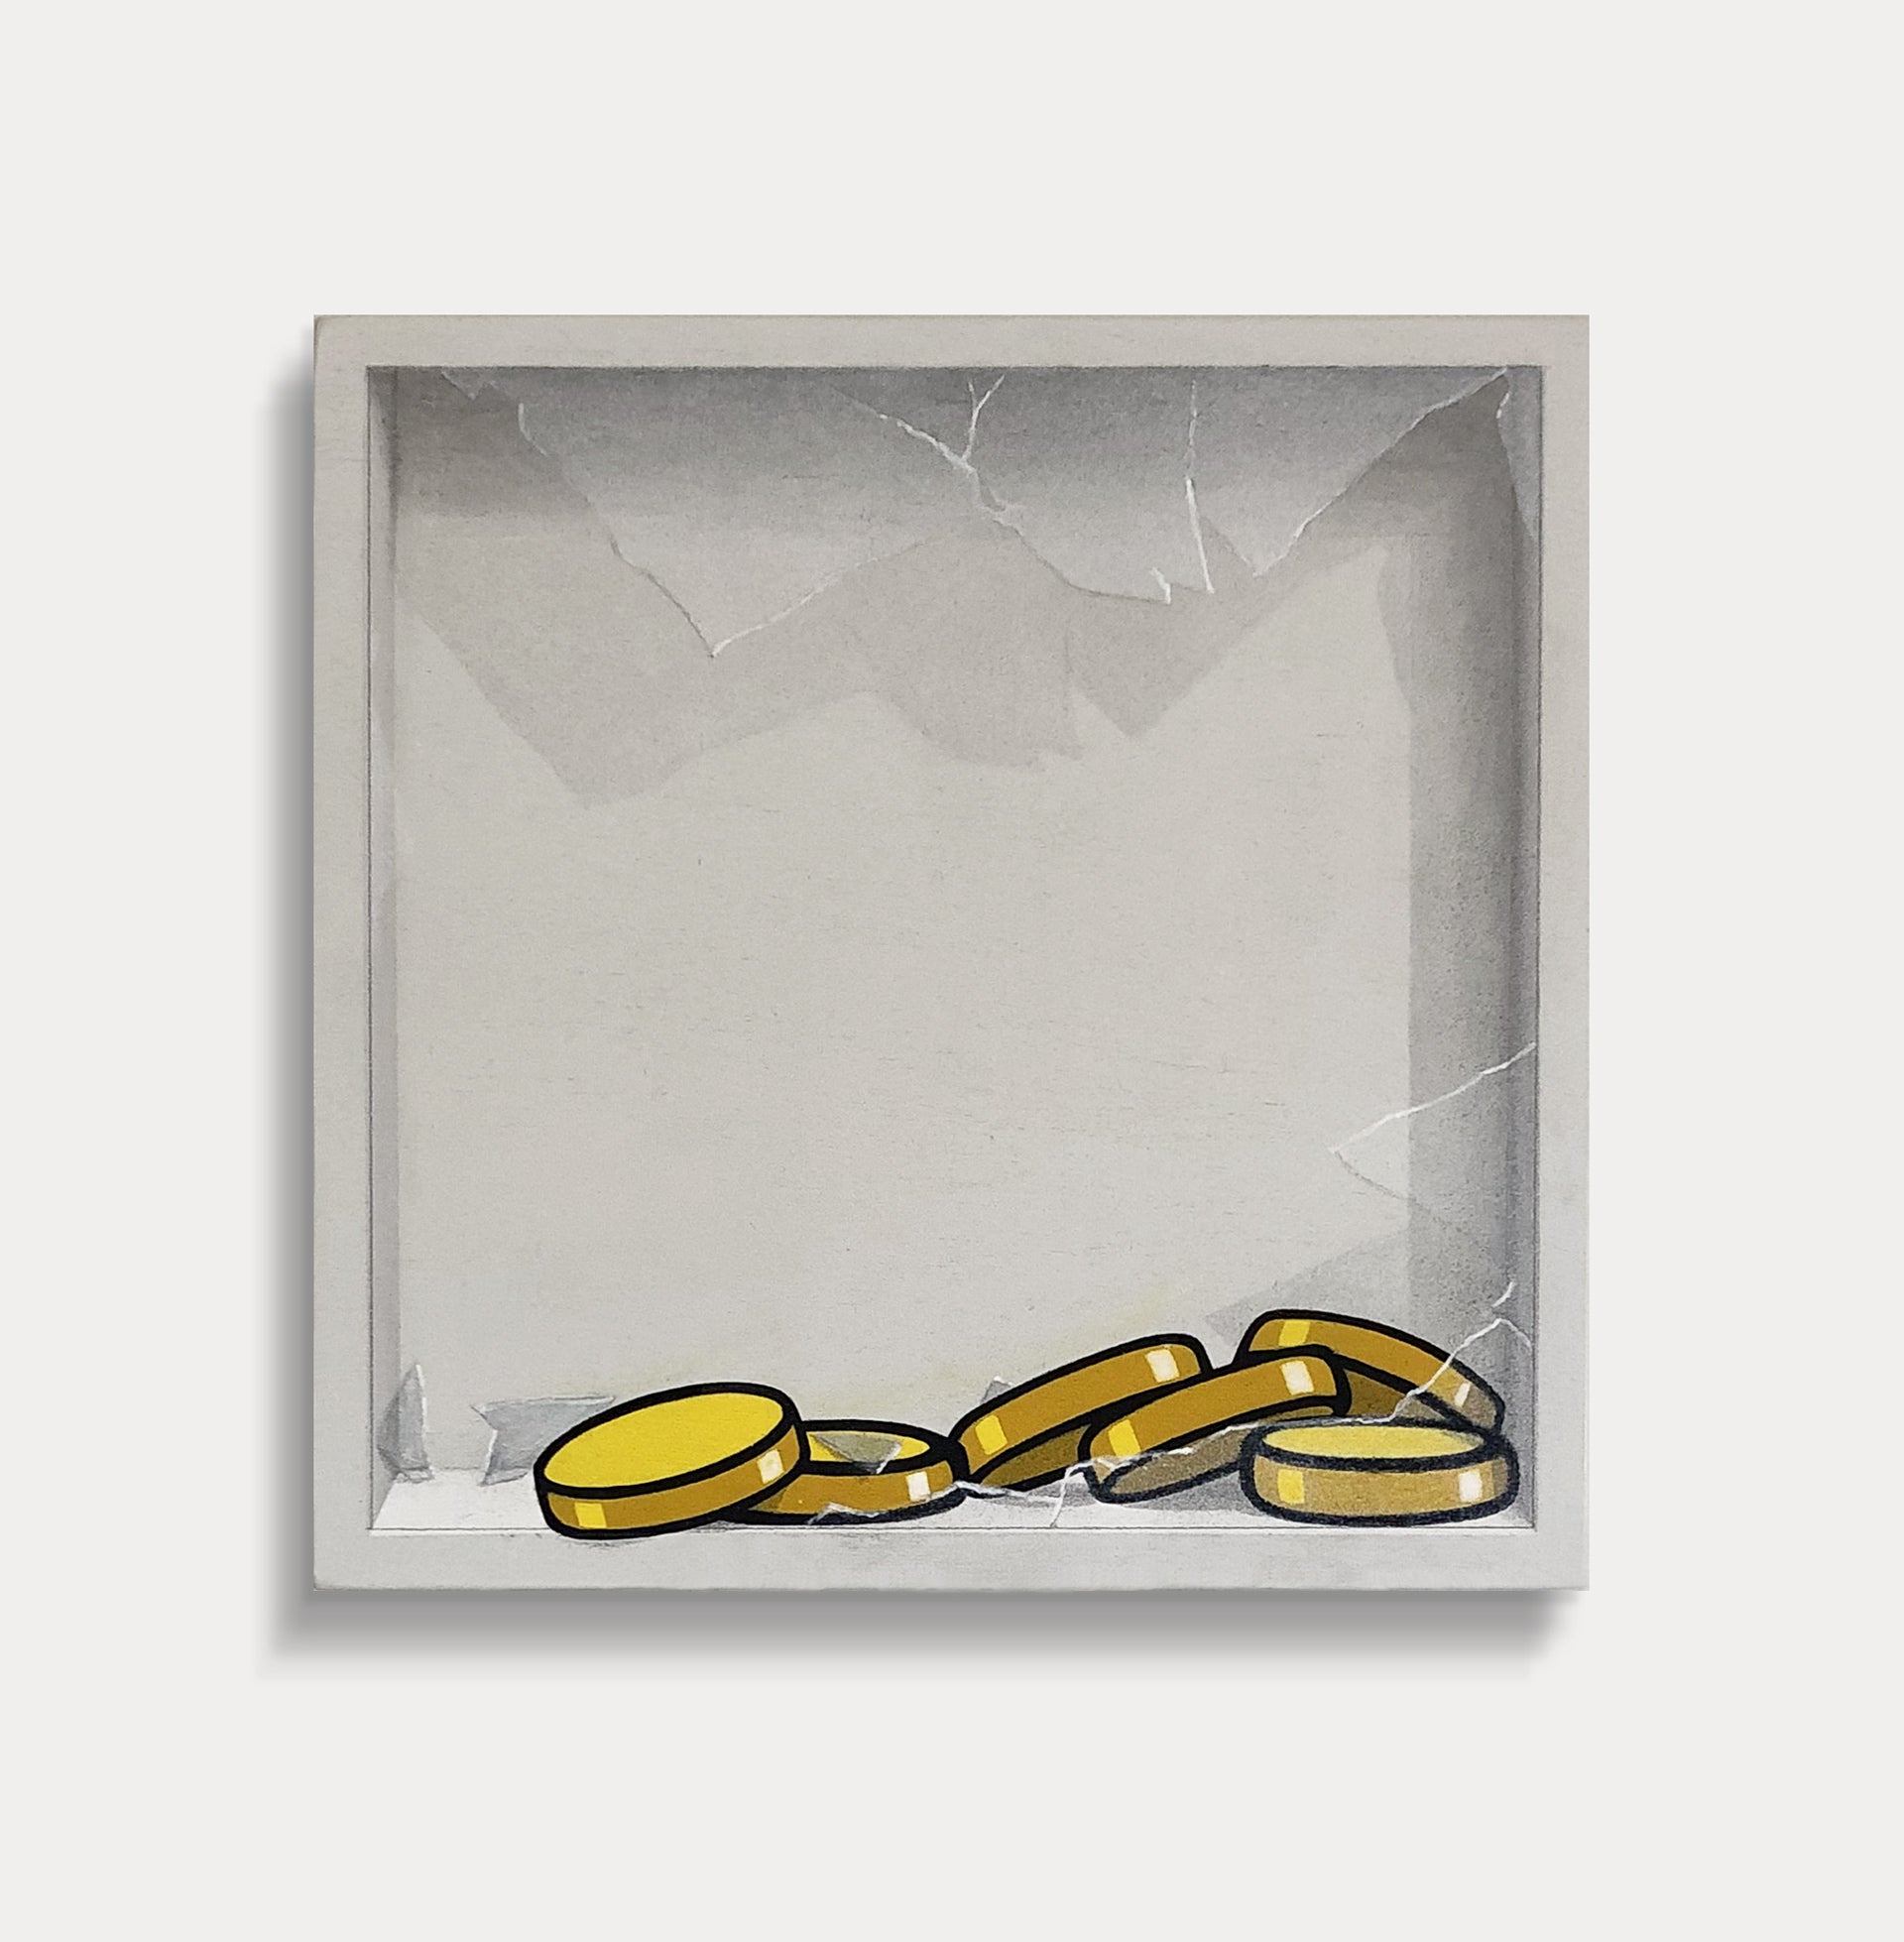 "6 Gold Coins ($360)" by E.LEE